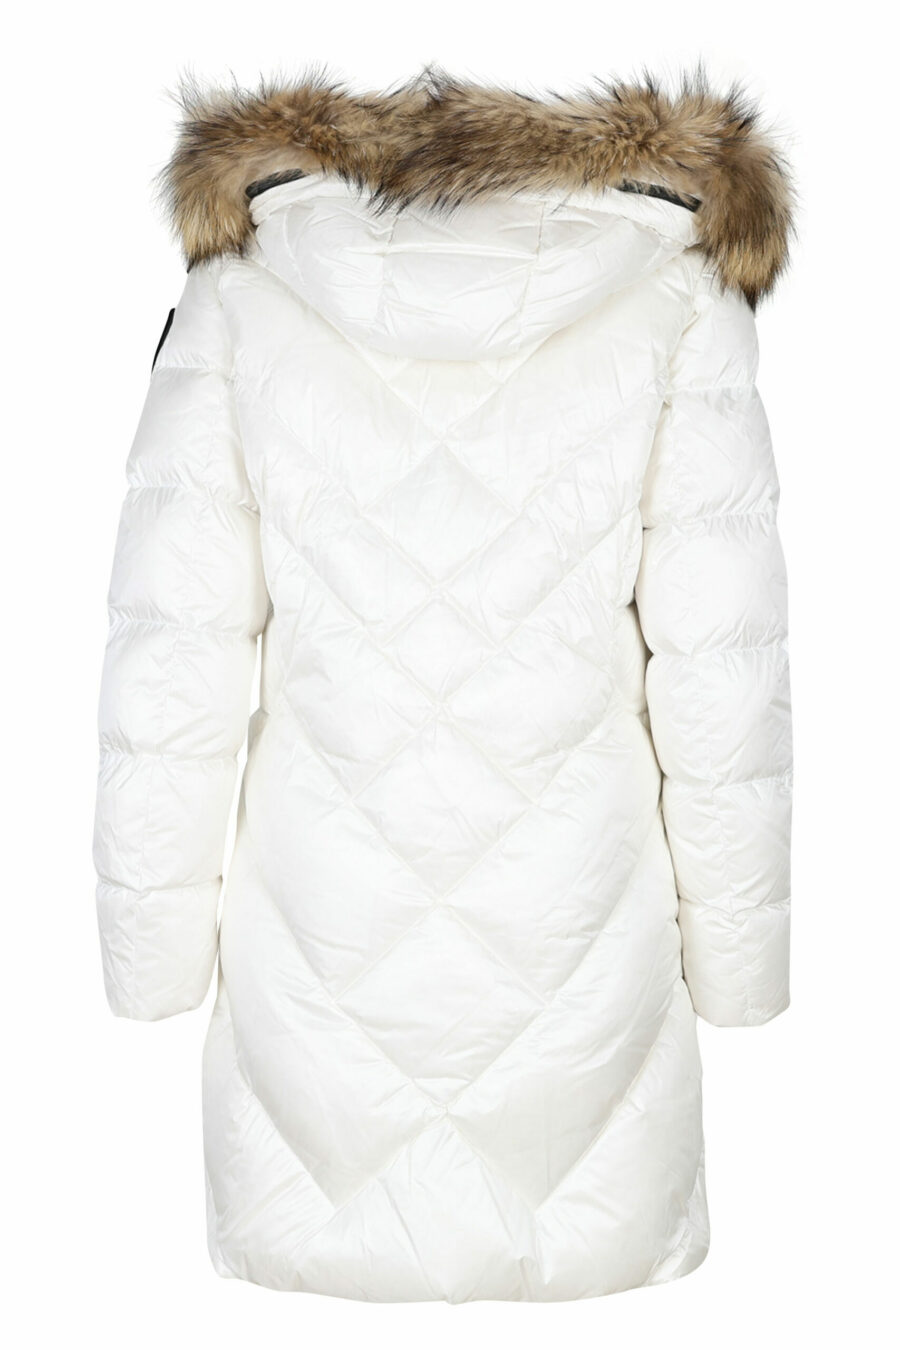 White waterproof hooded jacket with fur hood and diagonal lines with beige lining - 8058610650896 3 scaled